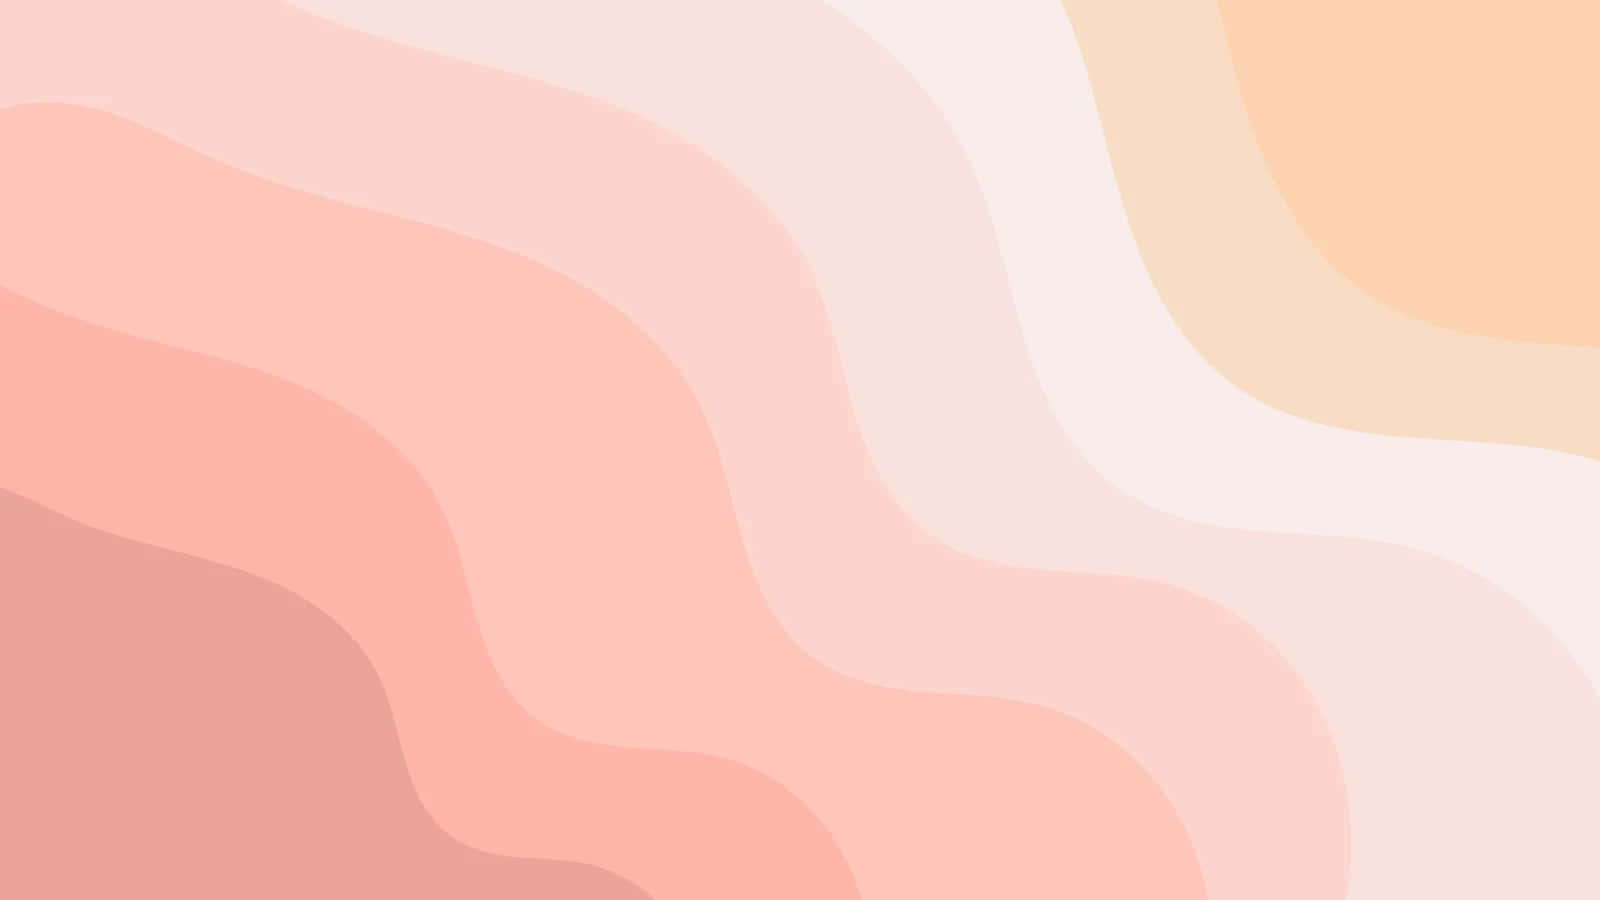 Abstract Pink Waves Background Wallpaper